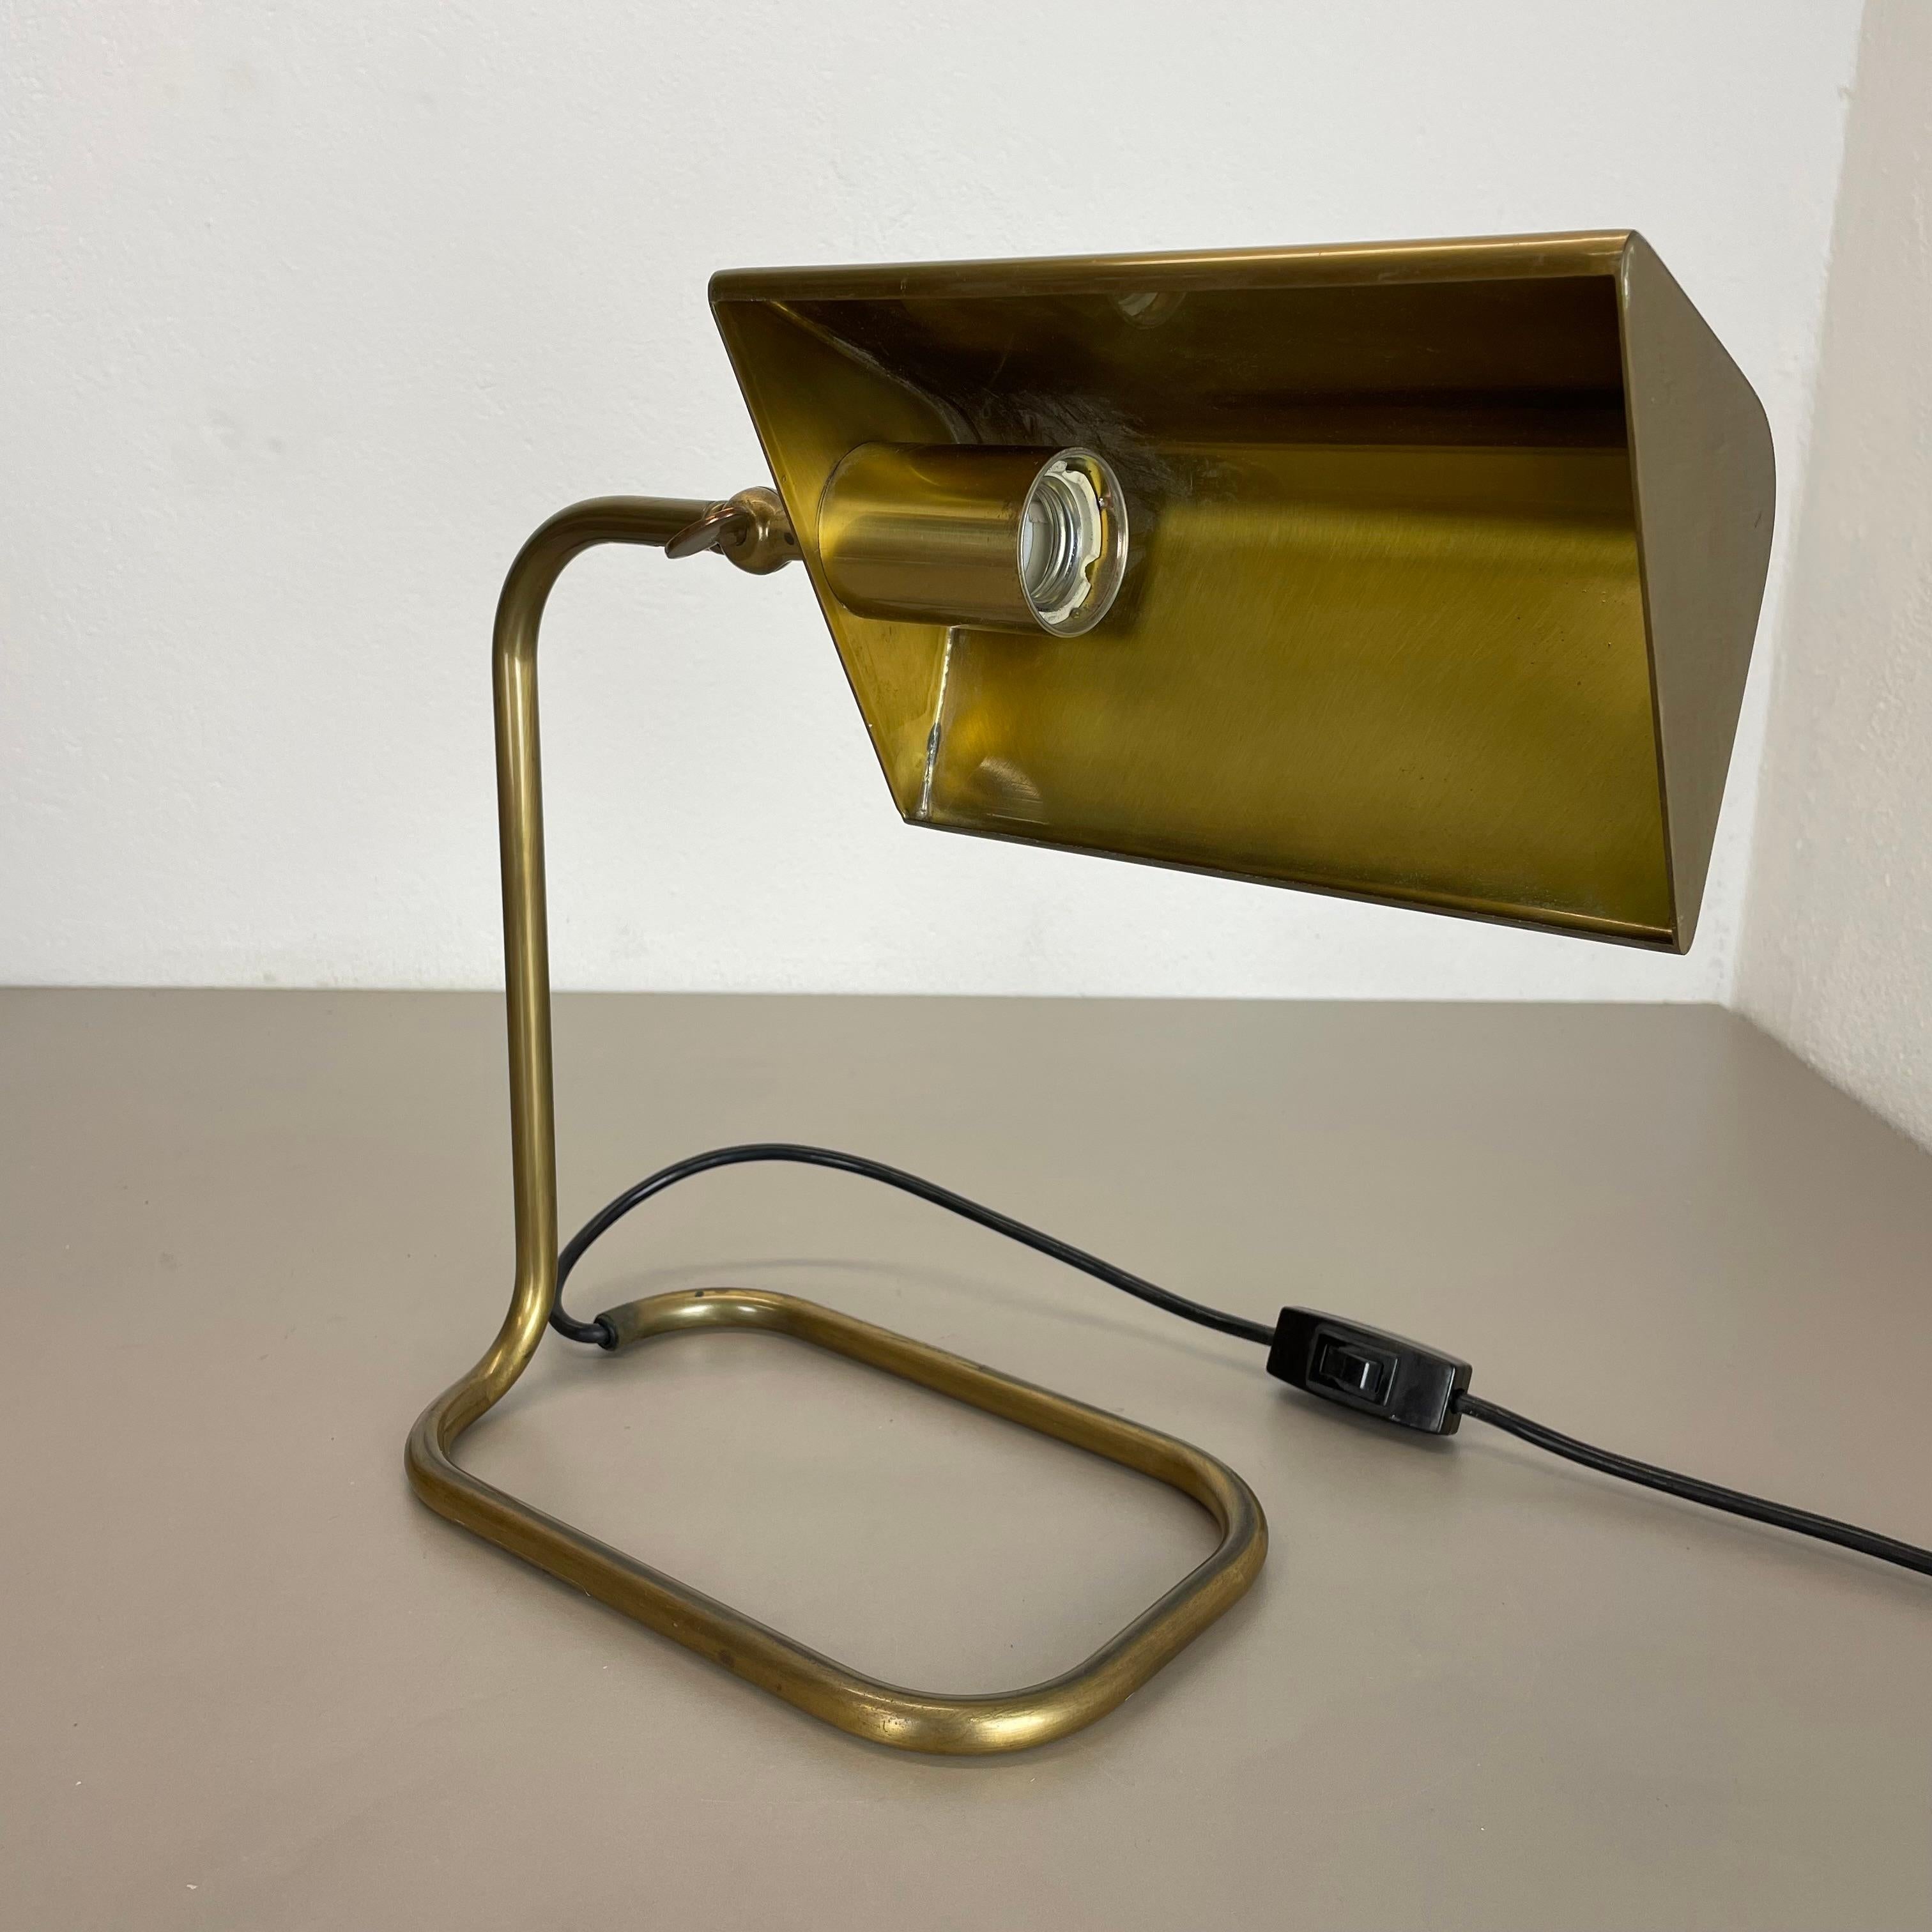 Cubic Modernist Brass Metal Table Light by Florian Schulz, Germany, 1970s For Sale 14